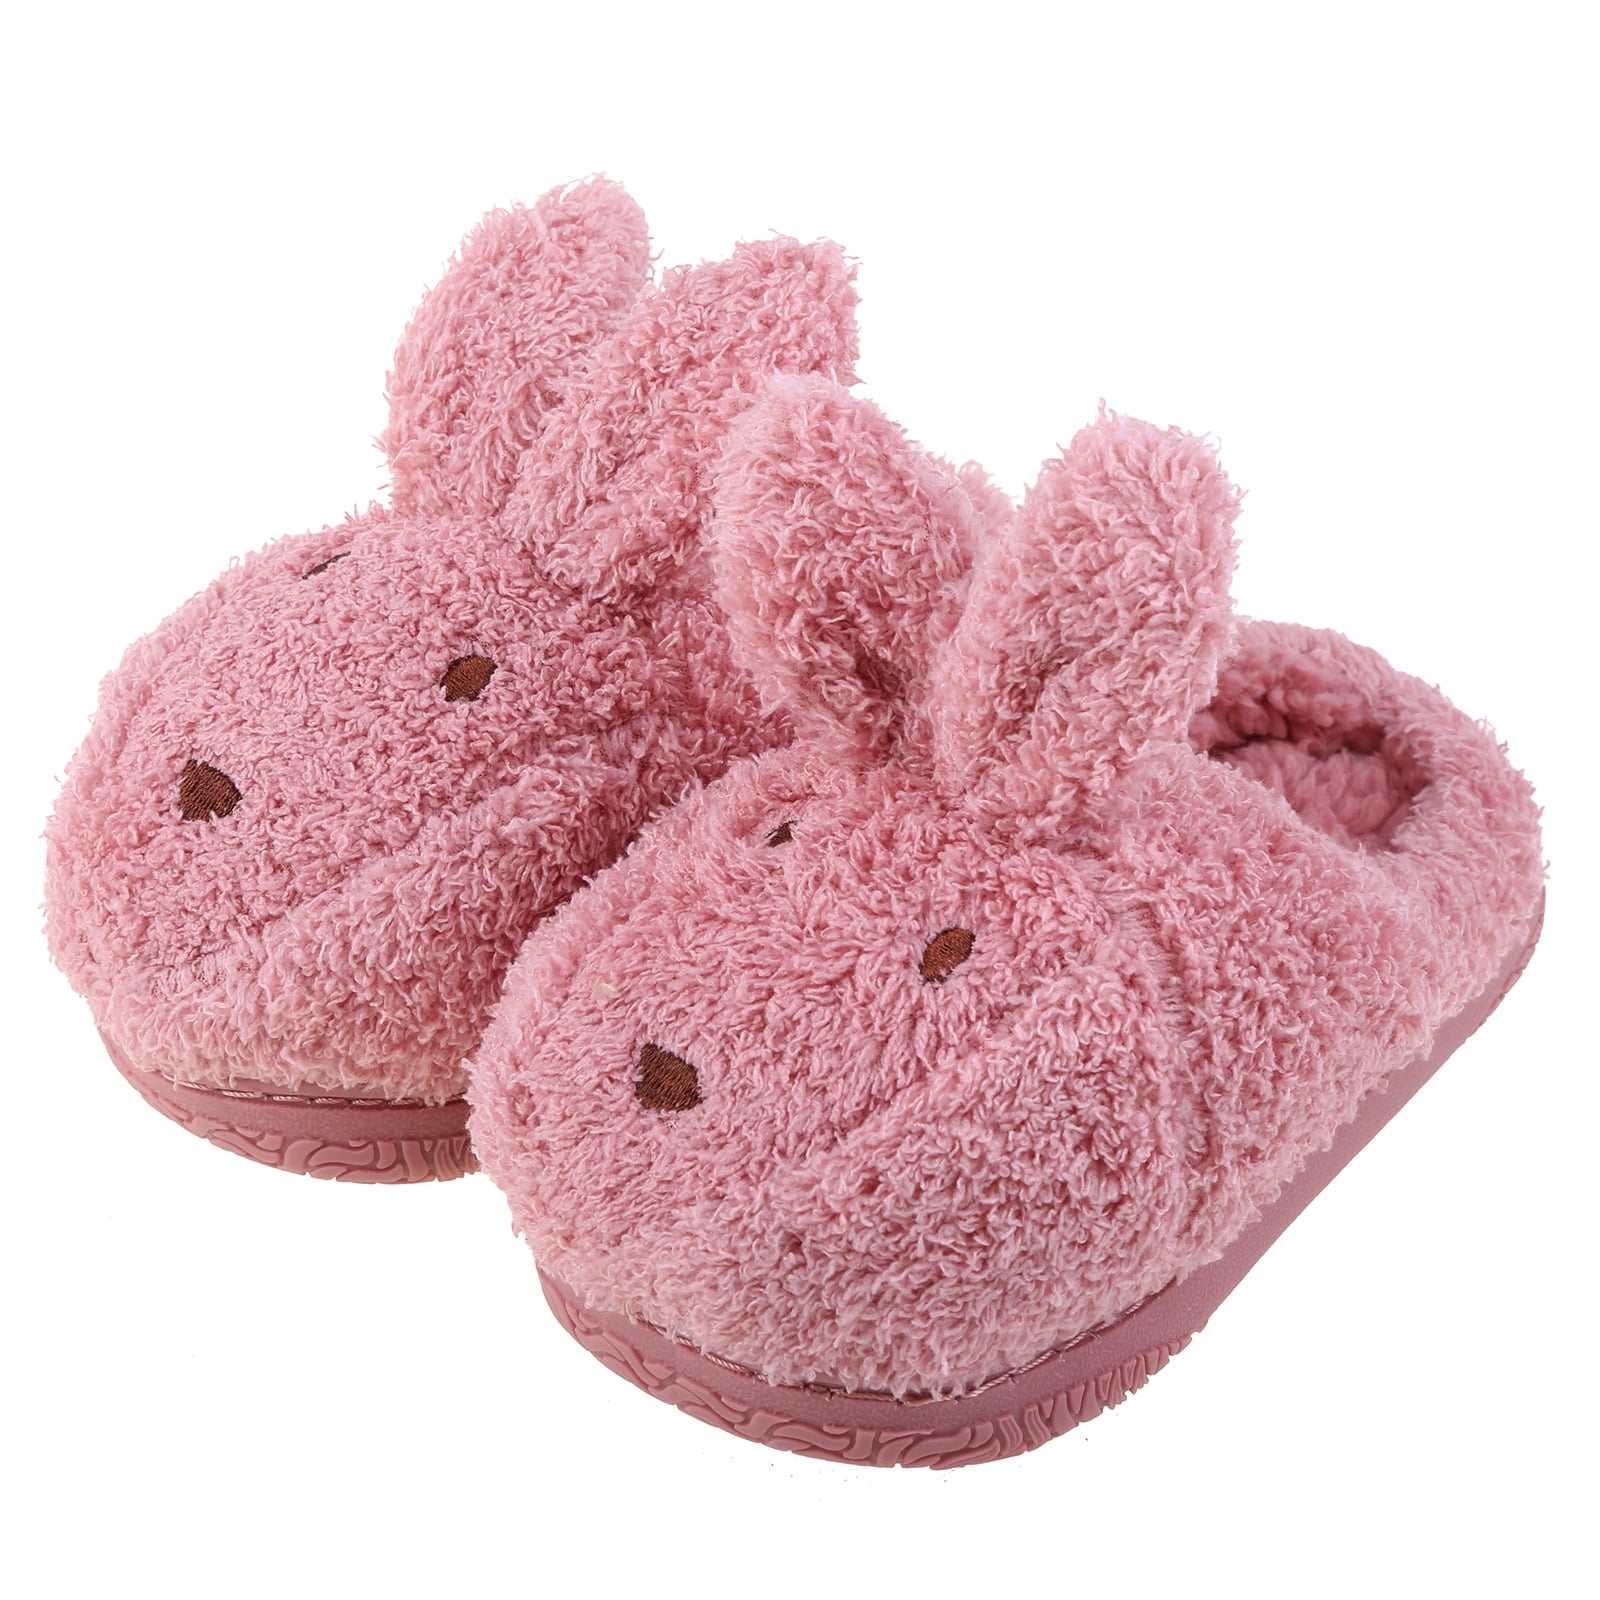 Bunny Ears Toddler Slippers 6 New with Tags House Shoes Girl's sz Adorable 